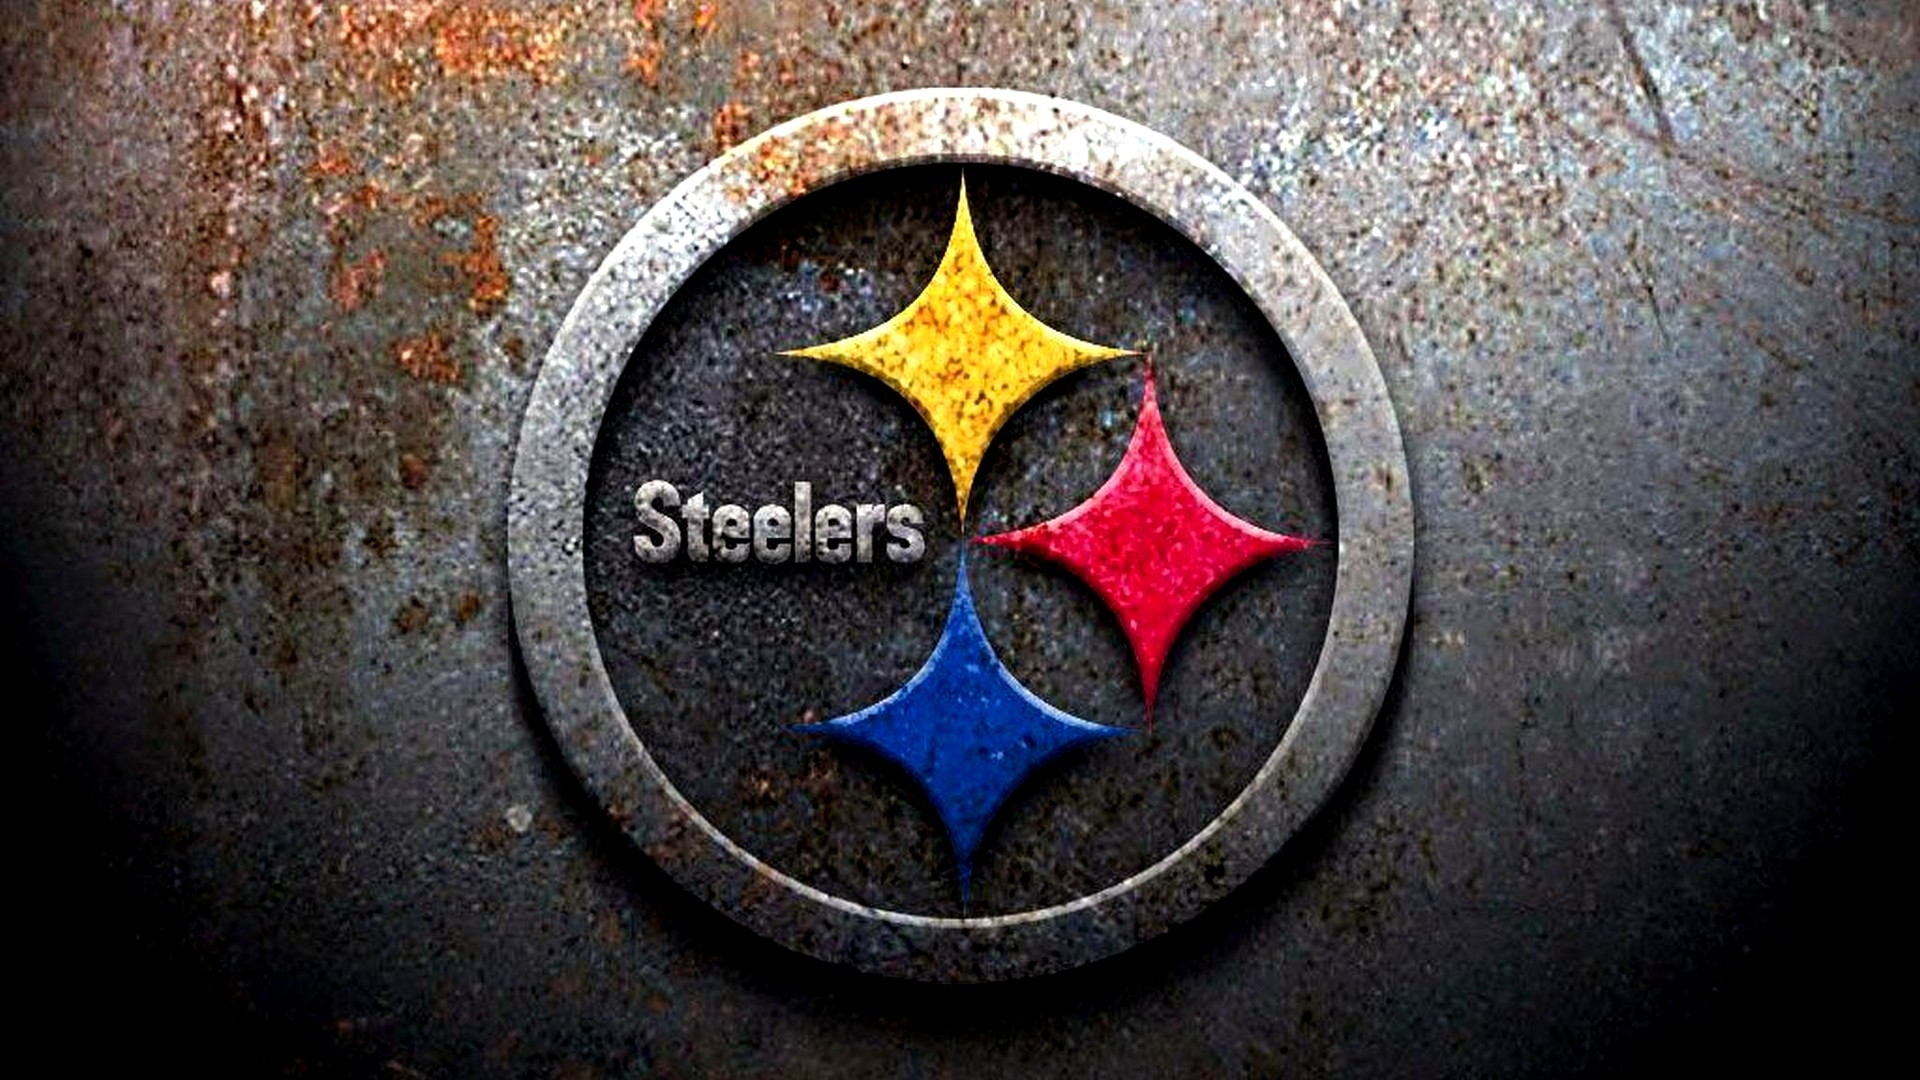 Pittsburgh Steelers Macbook Backgrounds with high-resolution 1920x1080 pixel. You can use and set as wallpaper for Notebook Screensavers, Mac Wallpapers, Mobile Home Screen, iPhone or Android Phones Lock Screen